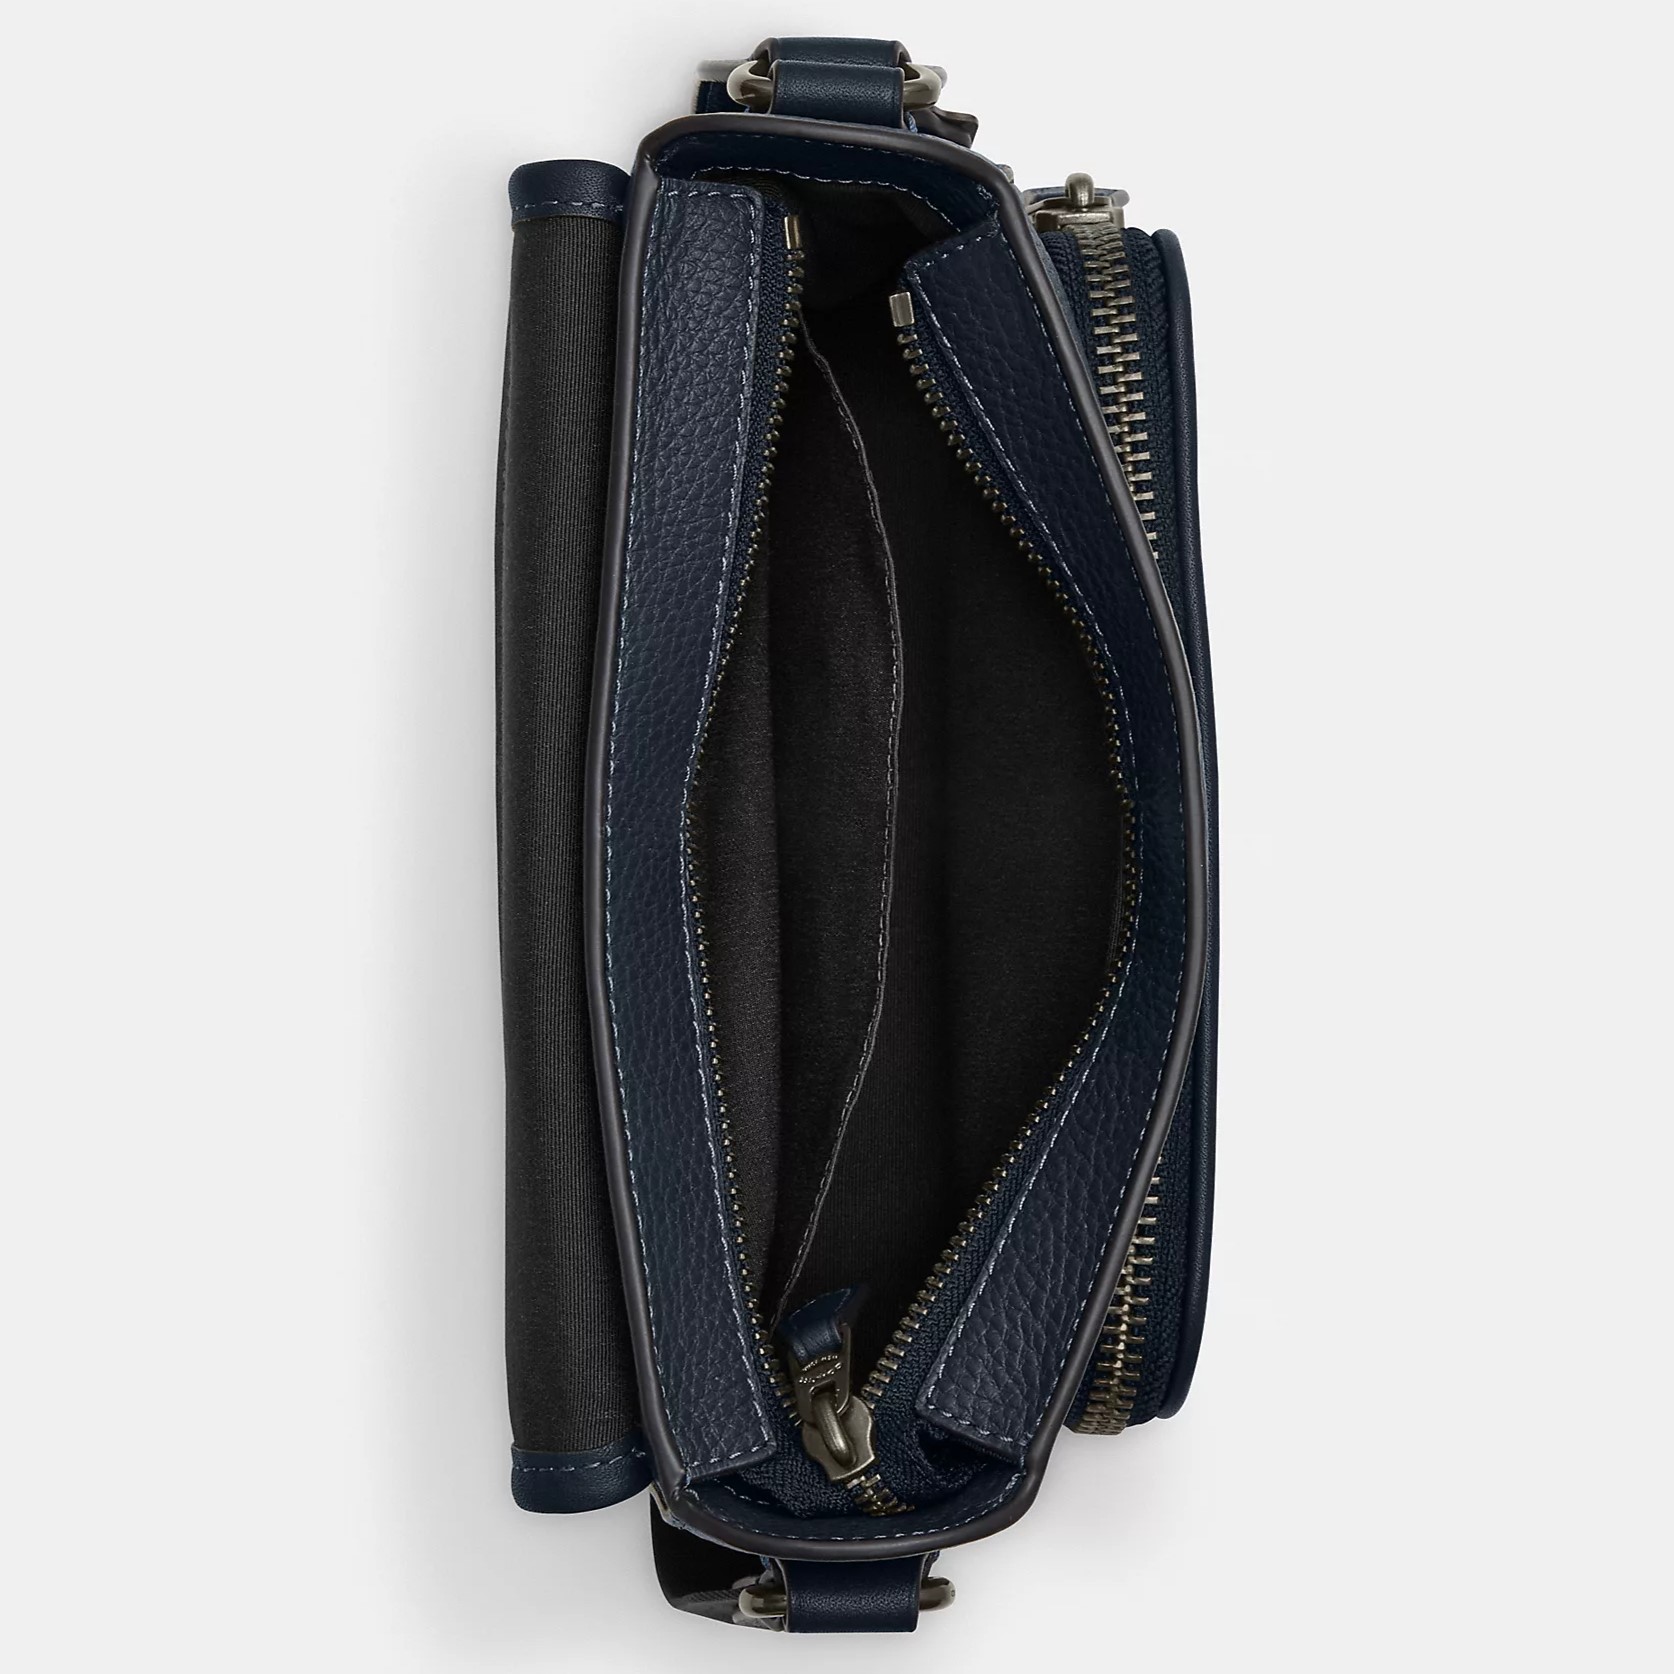 TÚI ĐEO CHÉO COACH NAM SULLIVAN FLAP CROSSBODY IN MIDNIGHT NAVY REFINED PEBBLE LEATHER AND SMOOTH CALF LEATHER CN729 3